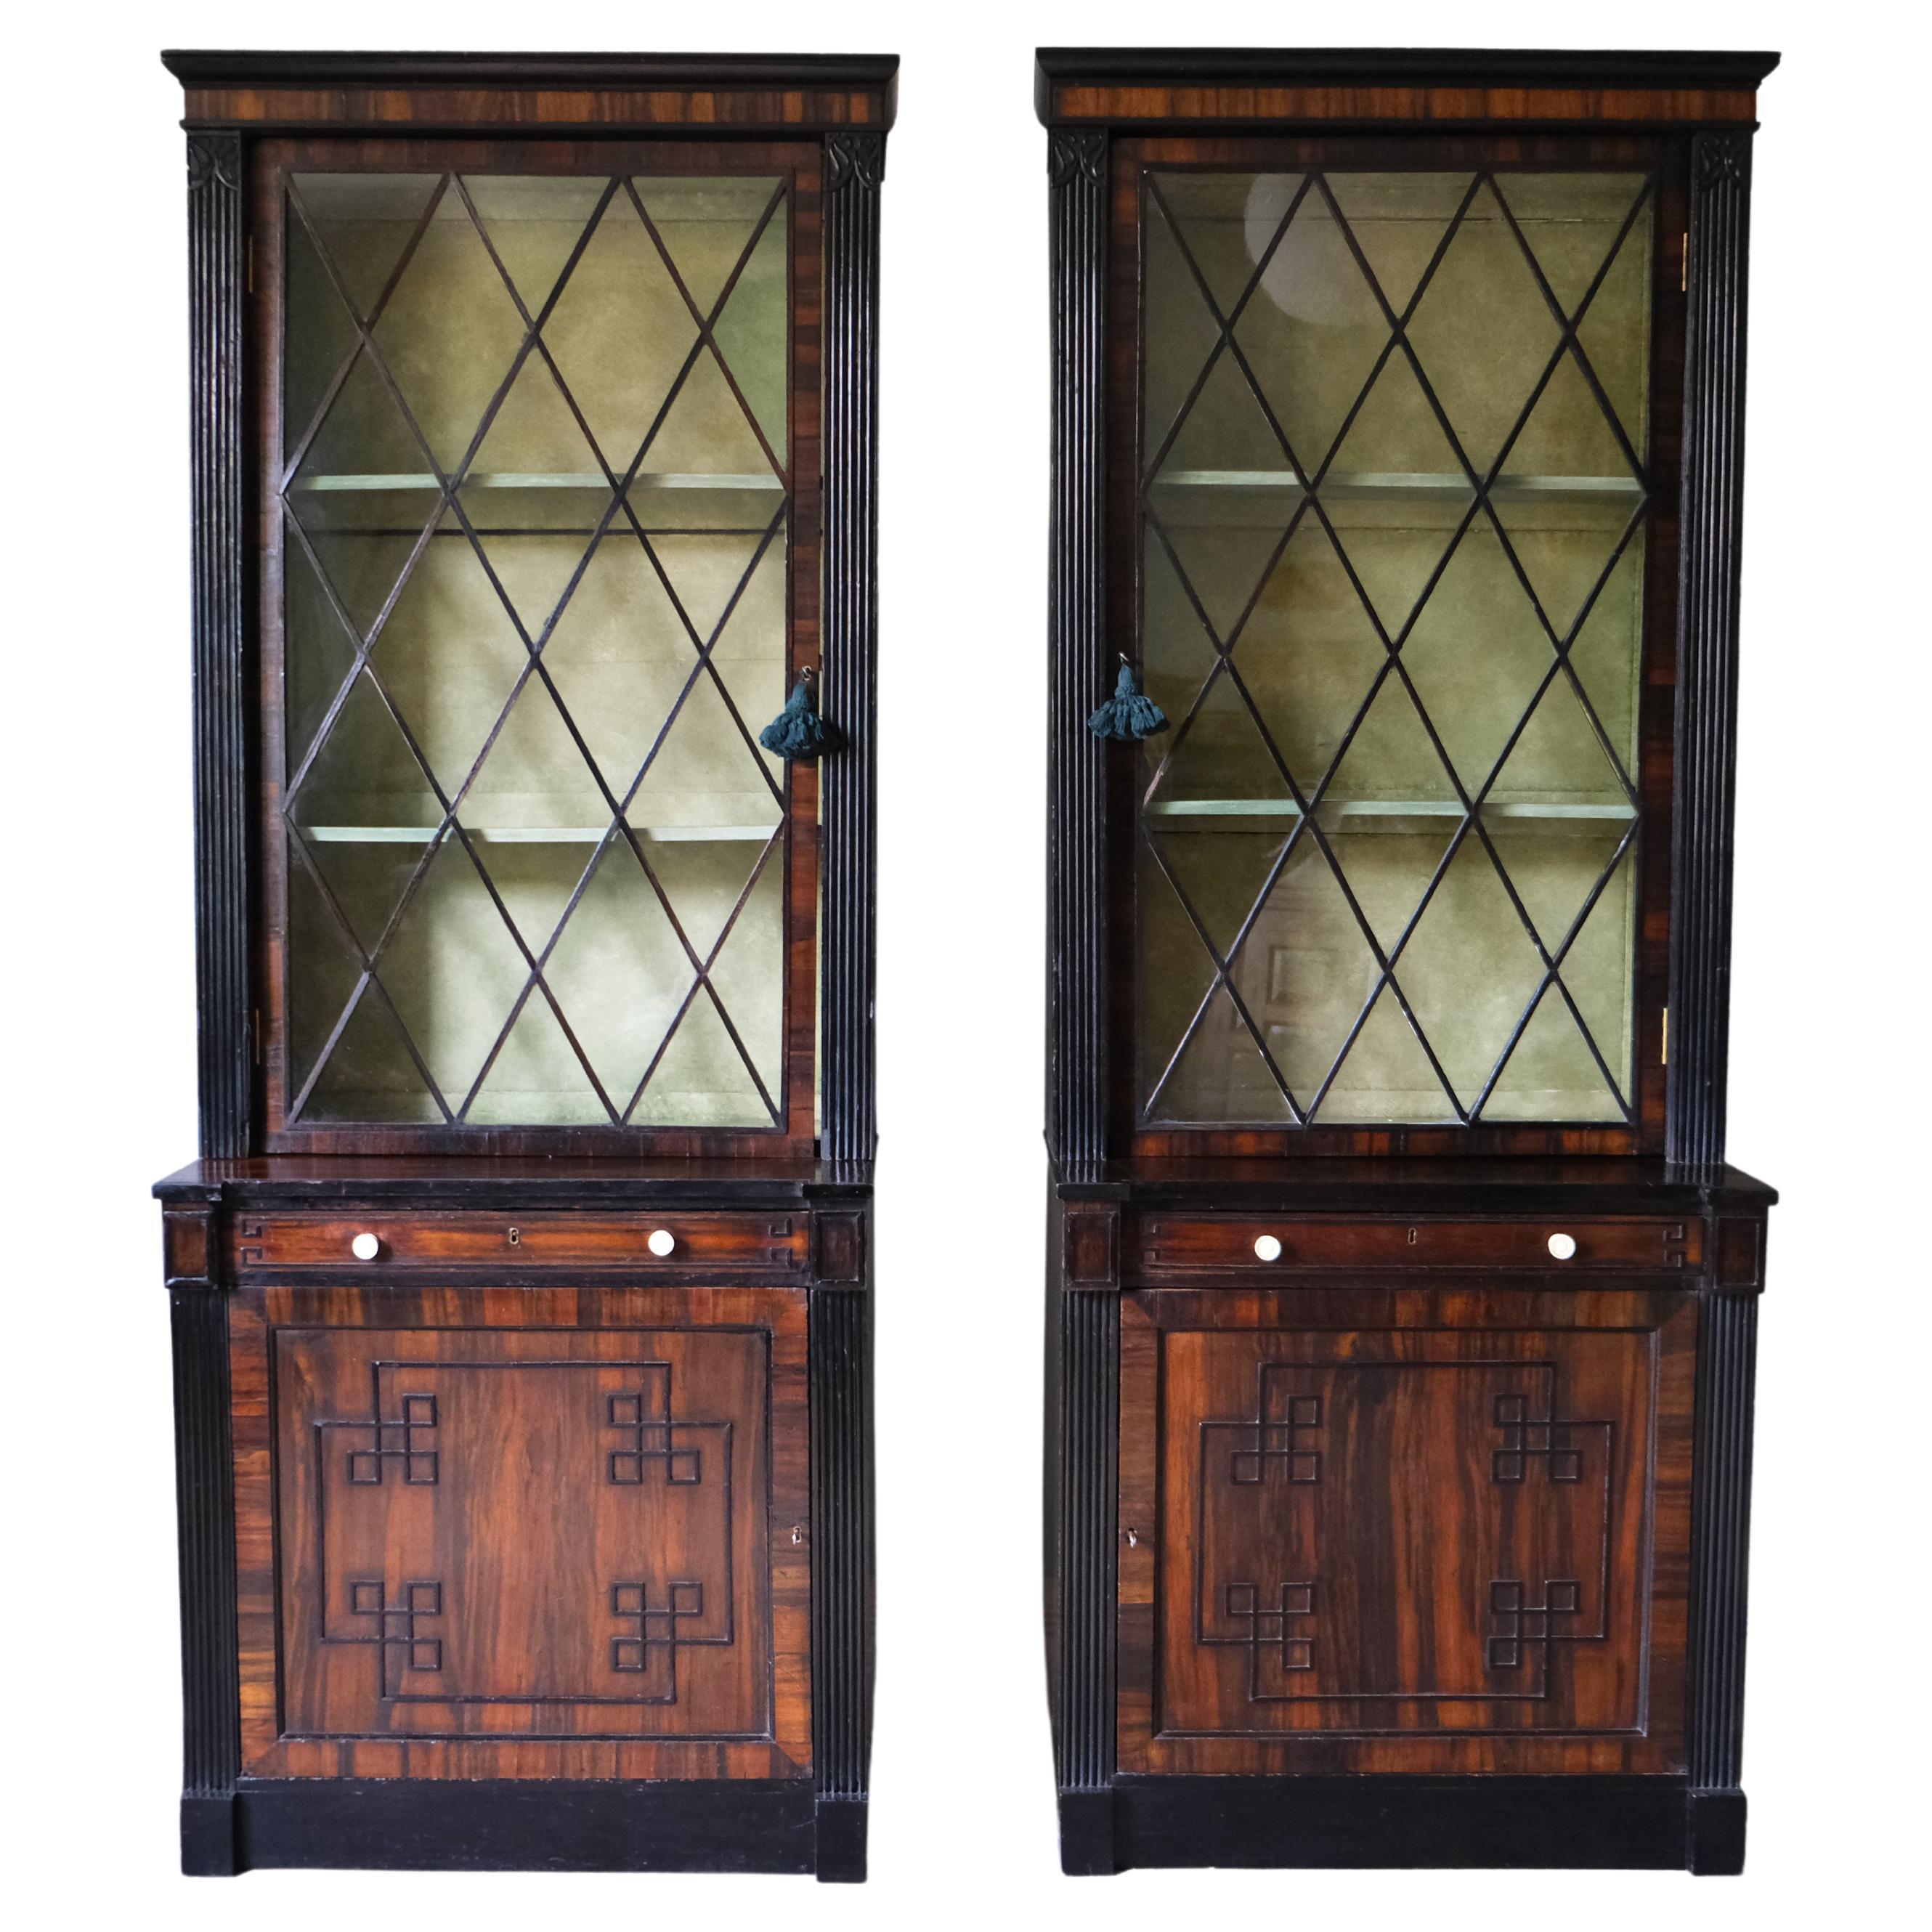 Pair of Regency Mahogany Library Bookcases with Rosewood Inlay